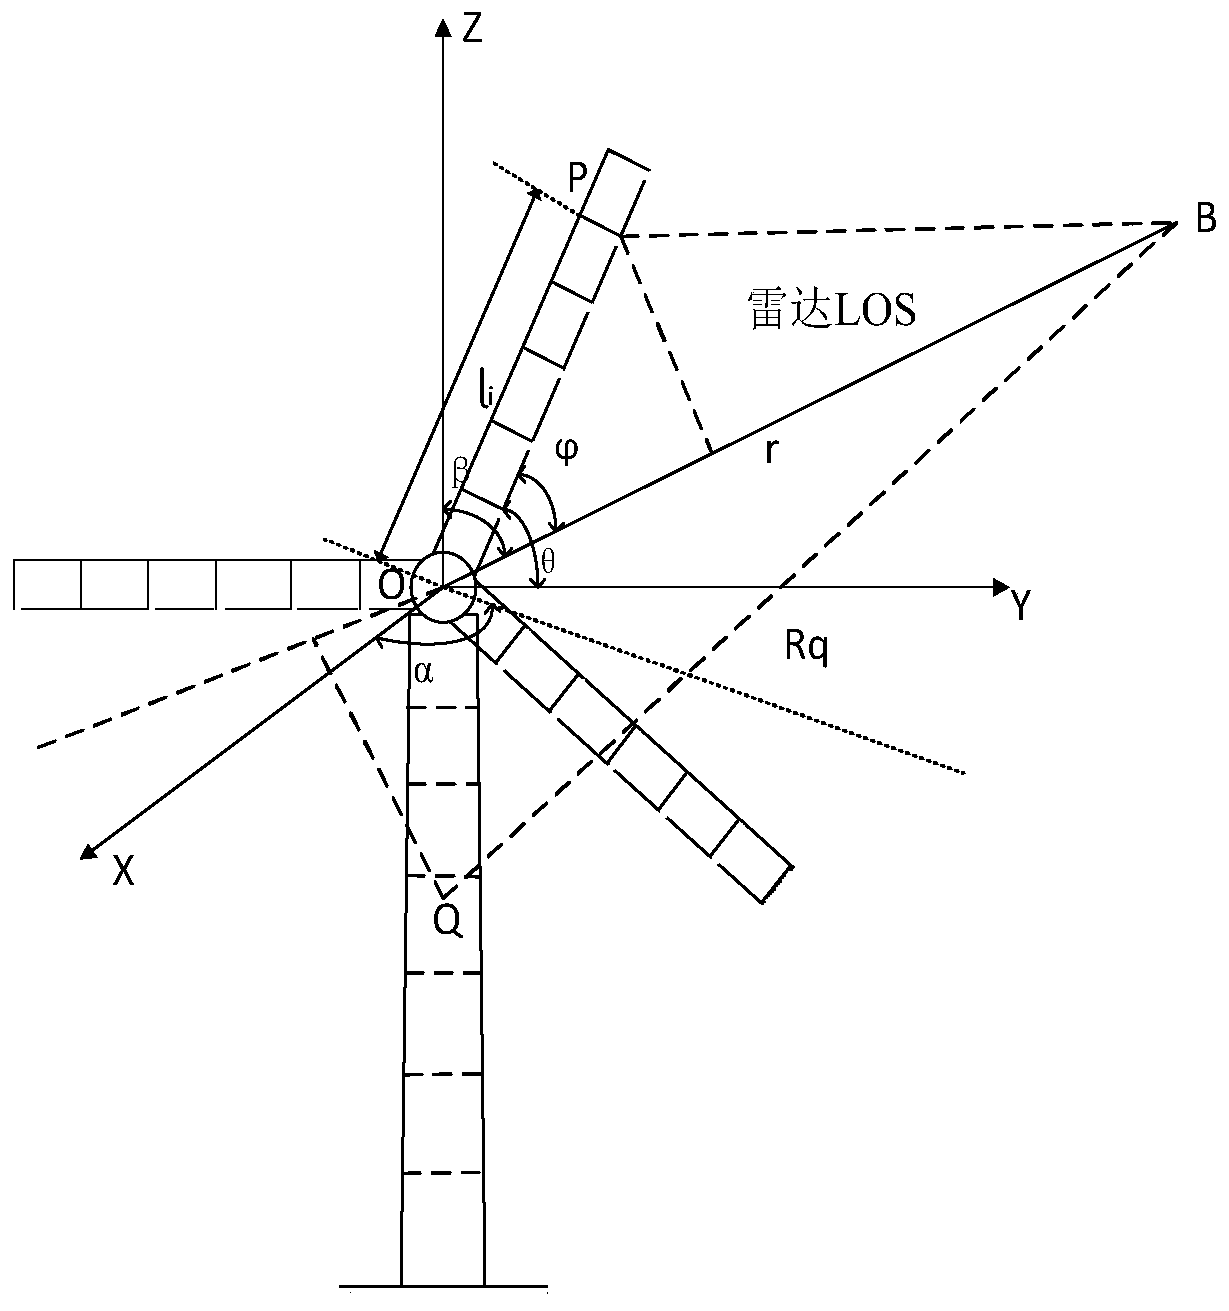 Meteorological radar wind power plant clutter rejection method based on two-dimensional combined interpolation